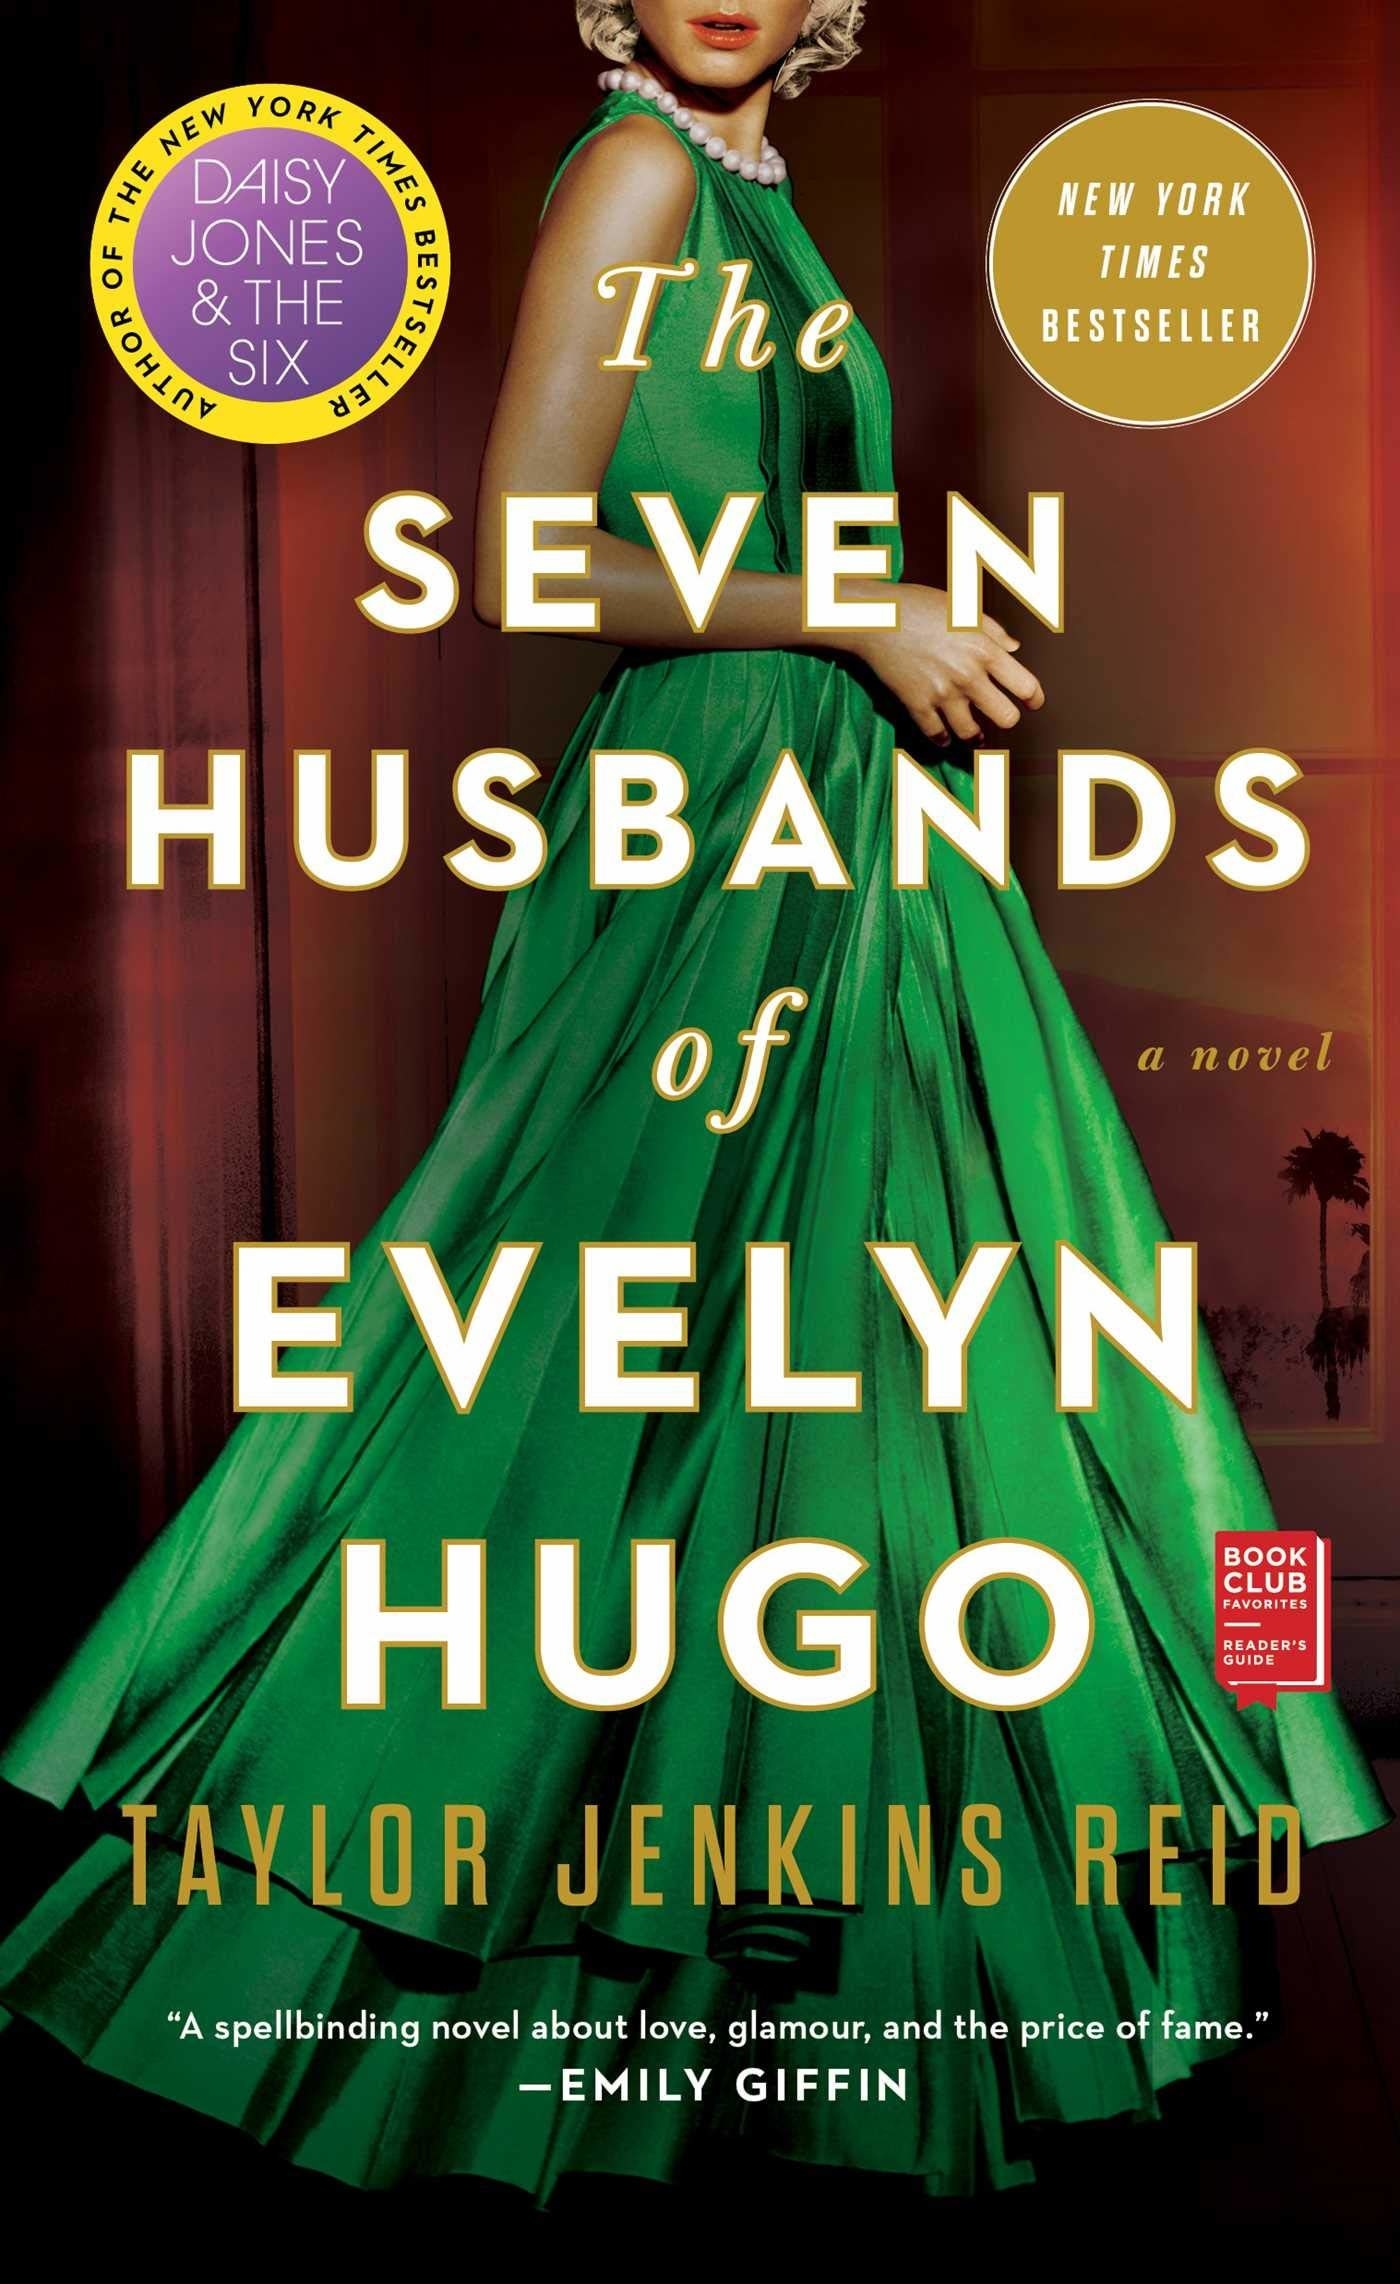 Cover of the book with a woman in a green dress 